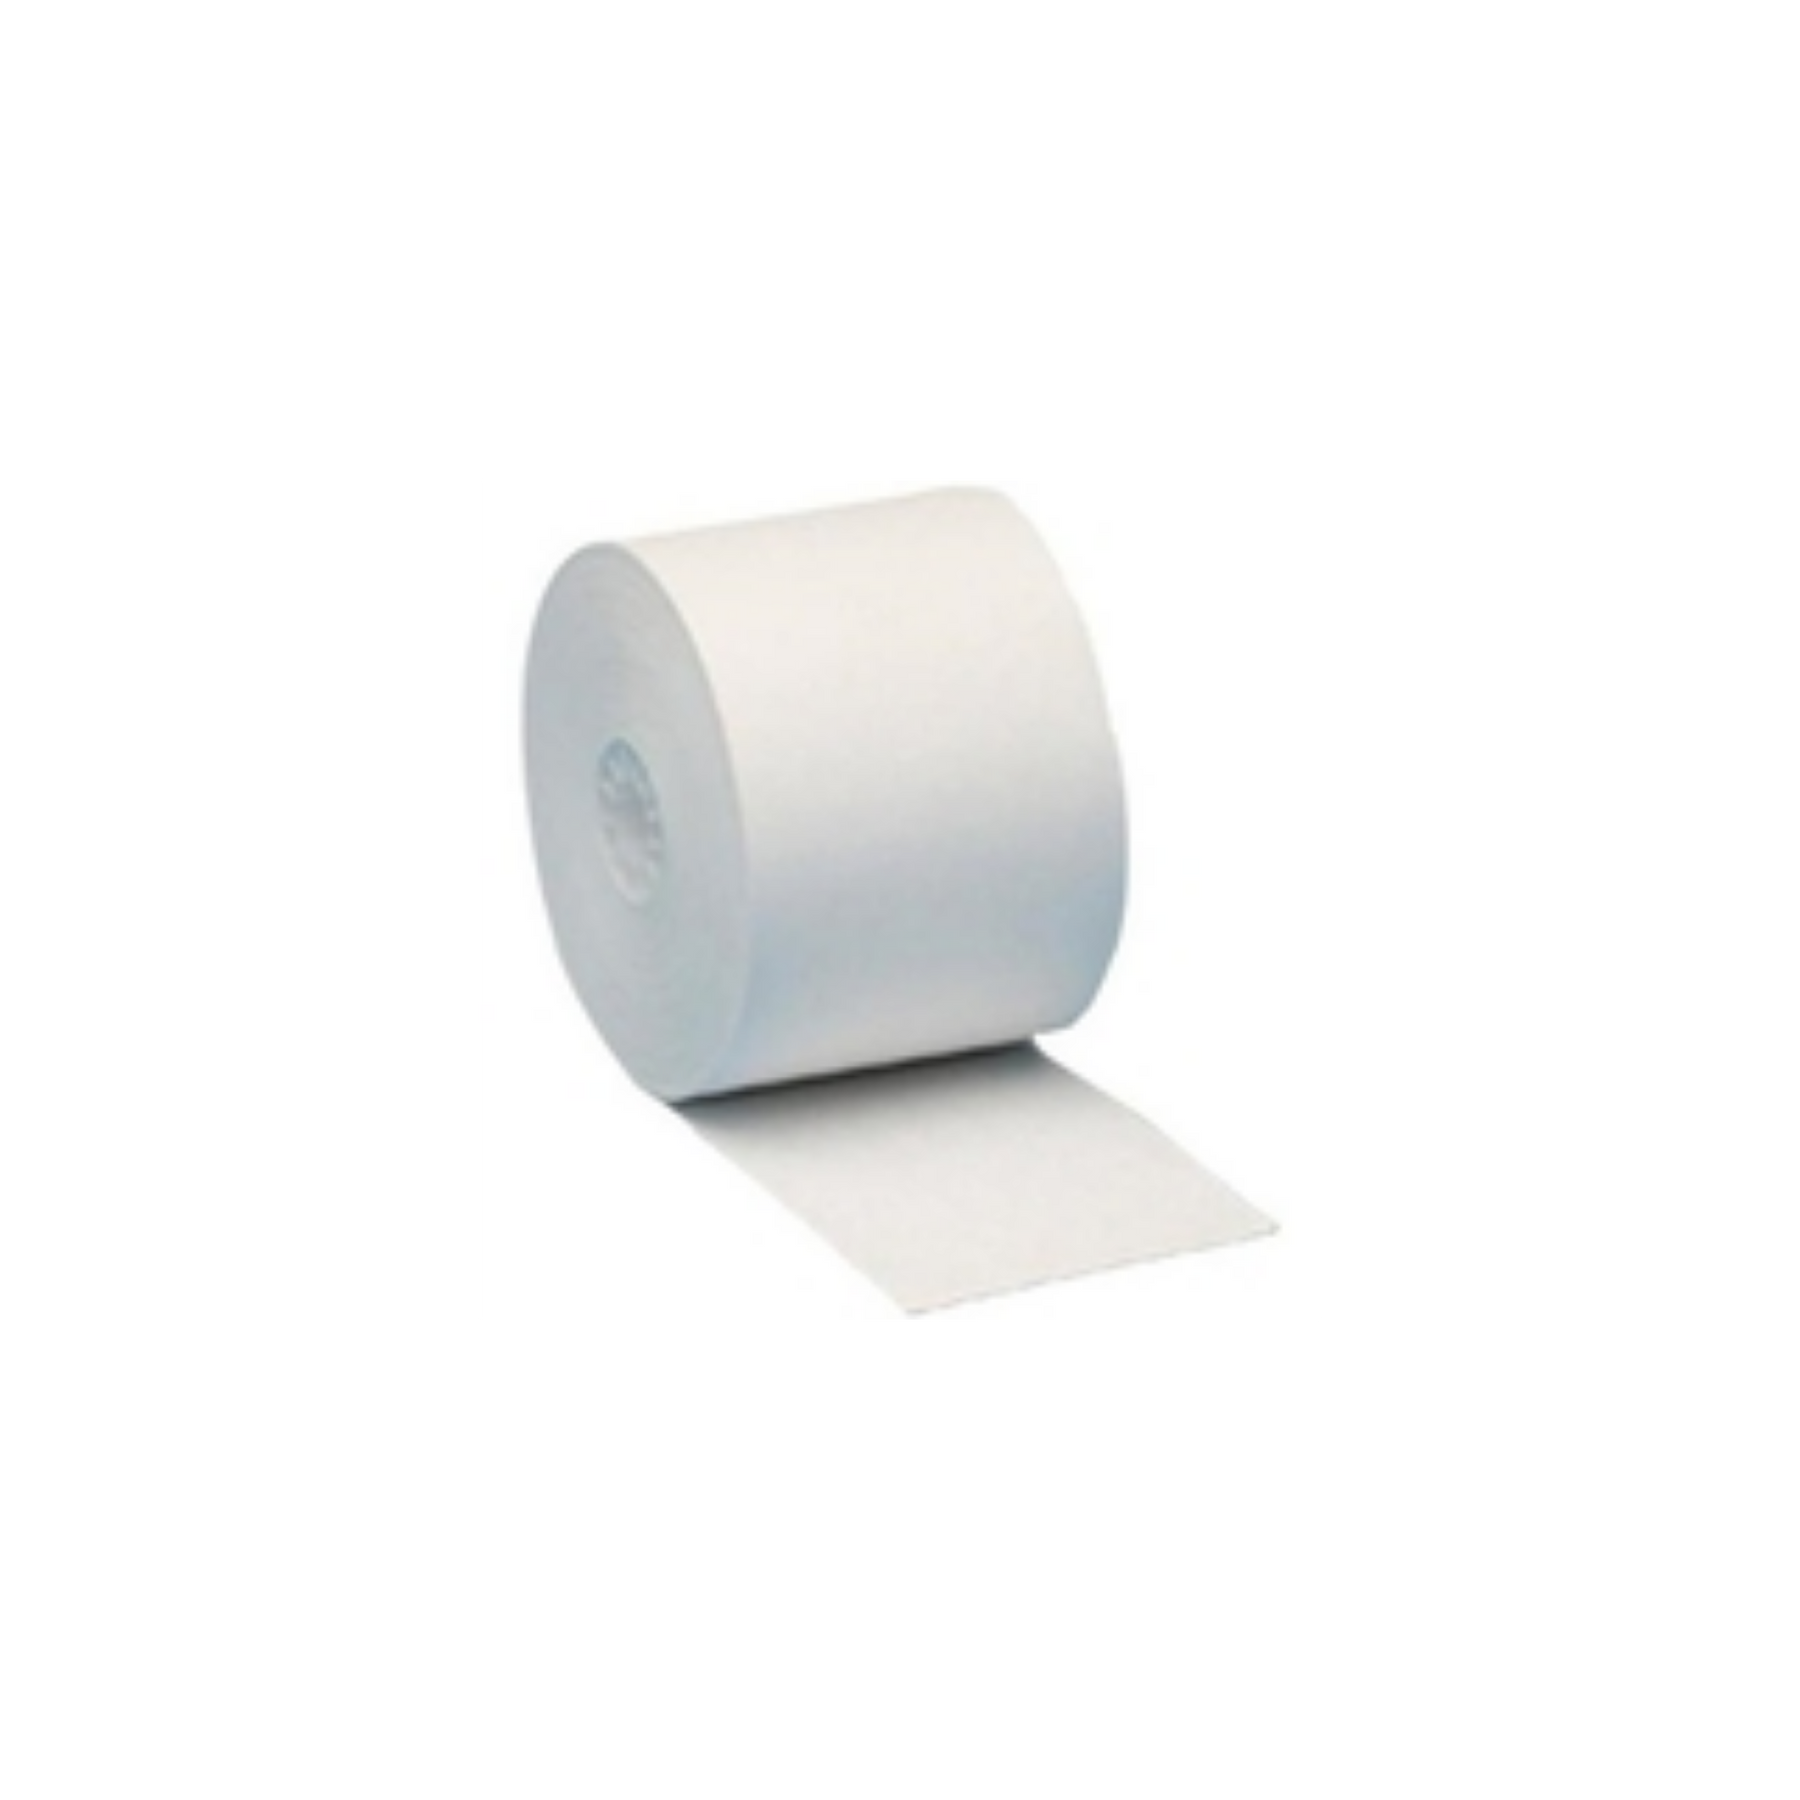 Thermamark, Consumables, Thermal Receipt Paper, 2.25"(58mm)X 34'(10.36m), Coreless, 1.06"(26.92mm)OD, White, BPA Free, 100 RPC, Priced Per Case